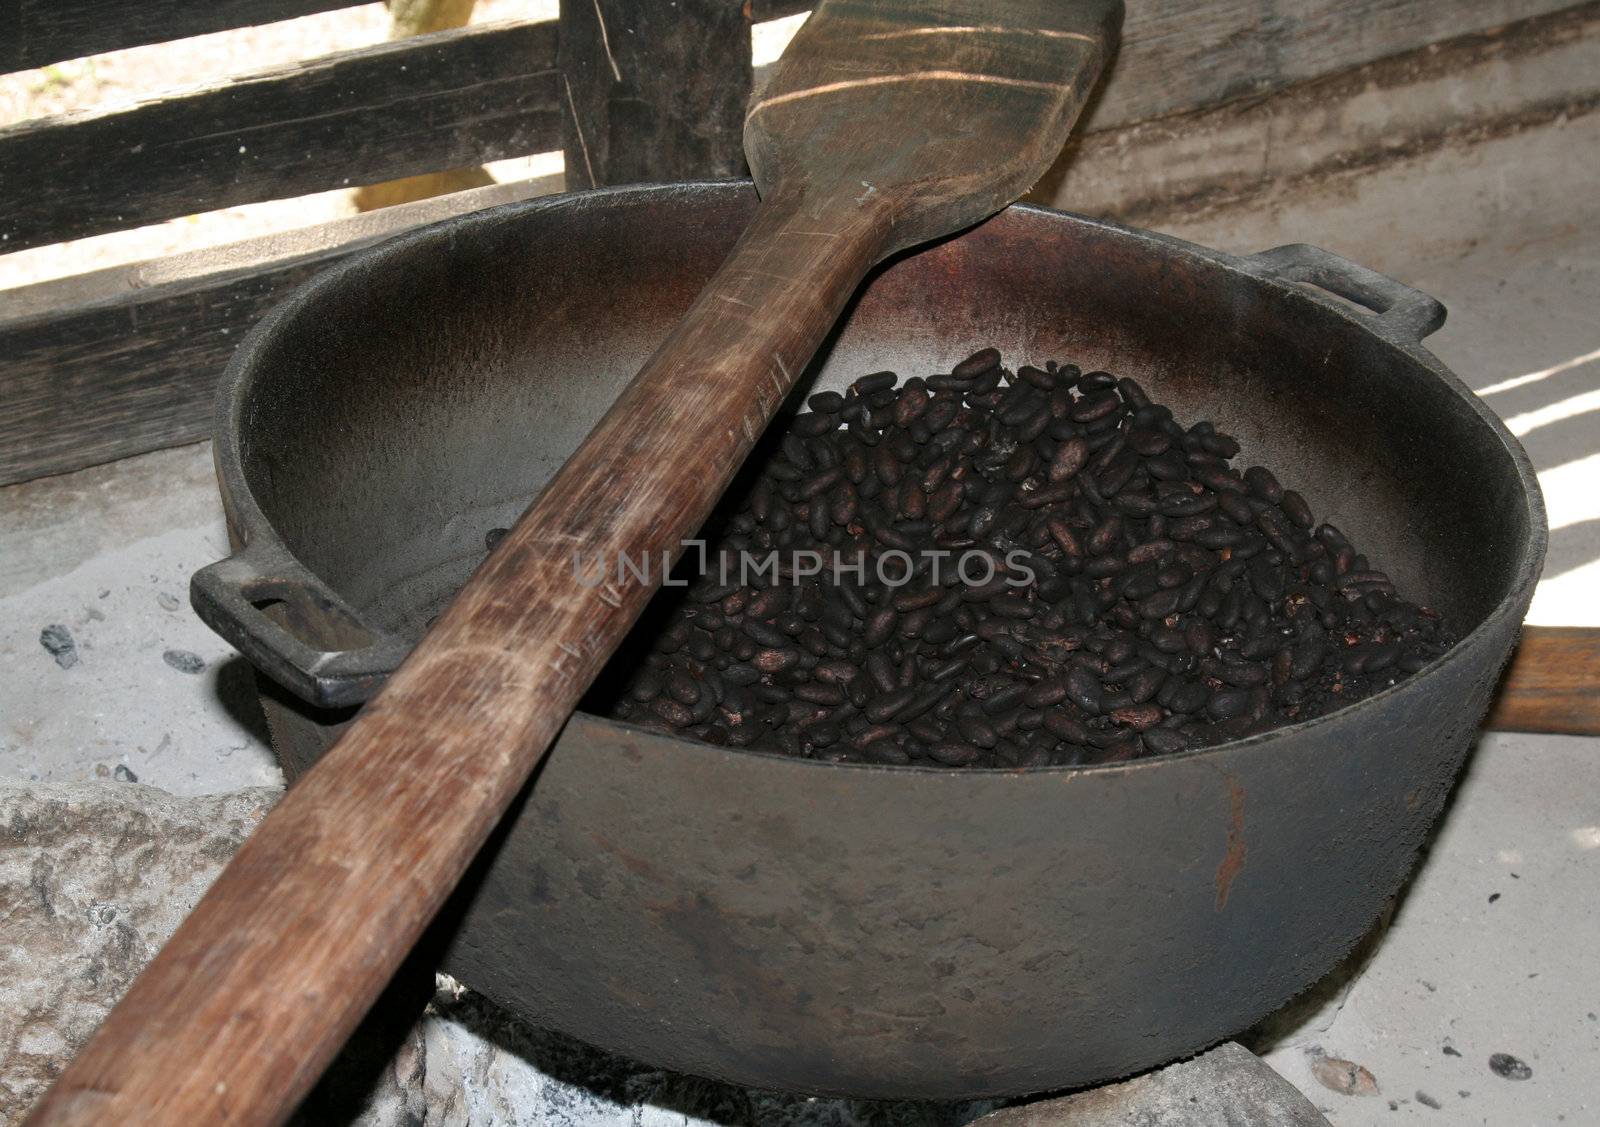 Roasted cocoa beans, still in the pot.
